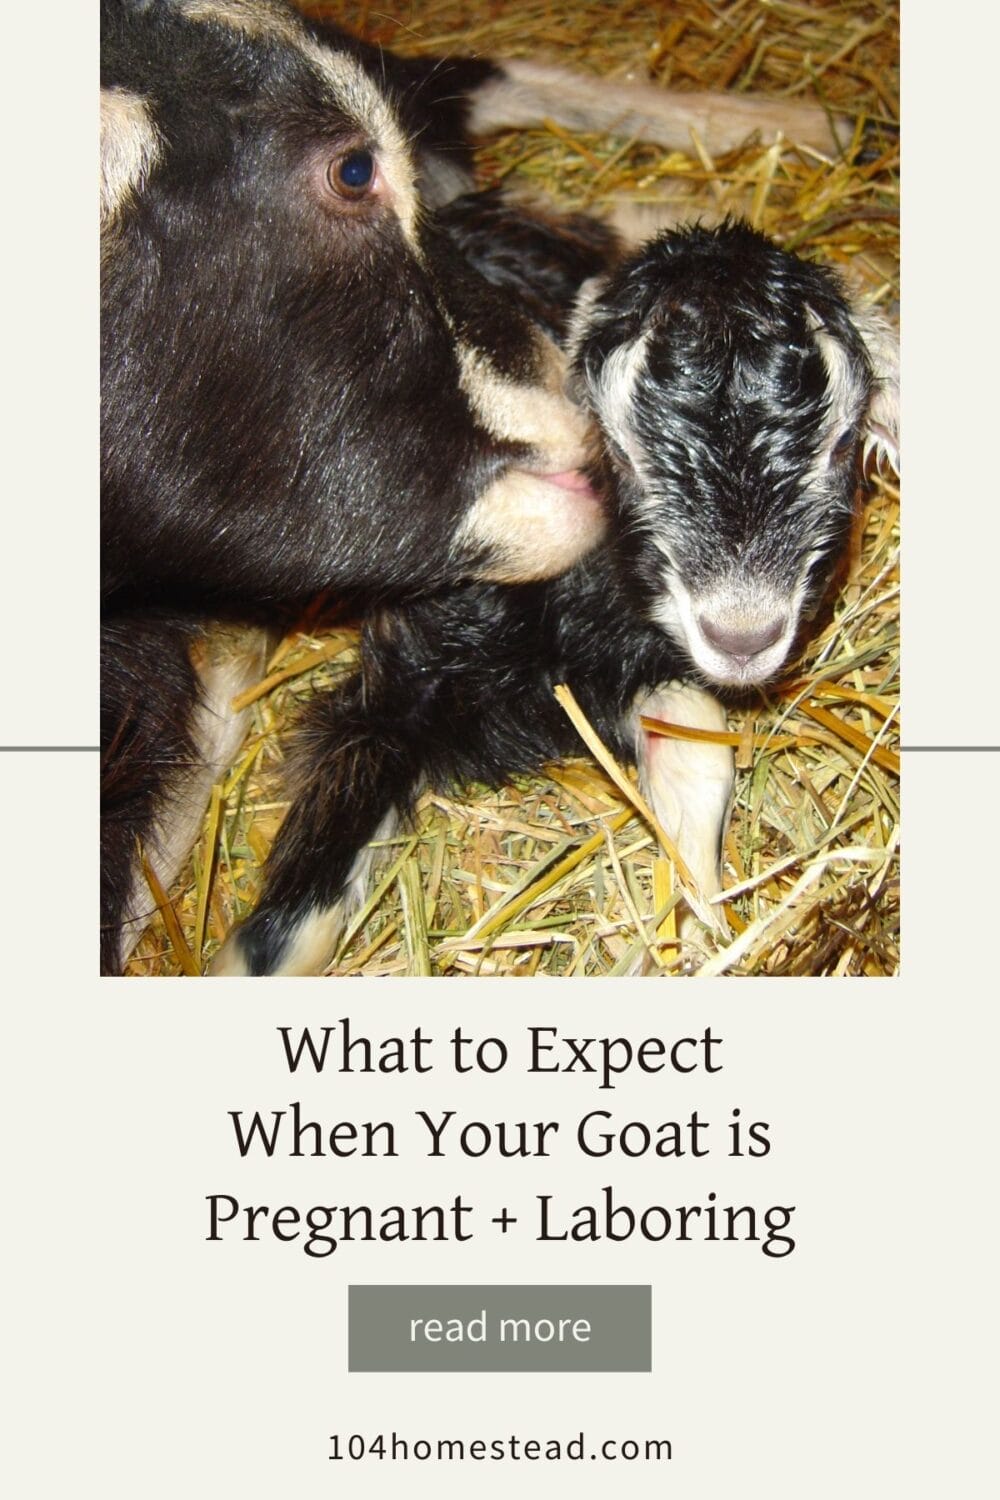 A Pinterest-friendly graphic for my post on how to care for a pregnant goat, recognize the signs of labor, can care for a laboring goat.